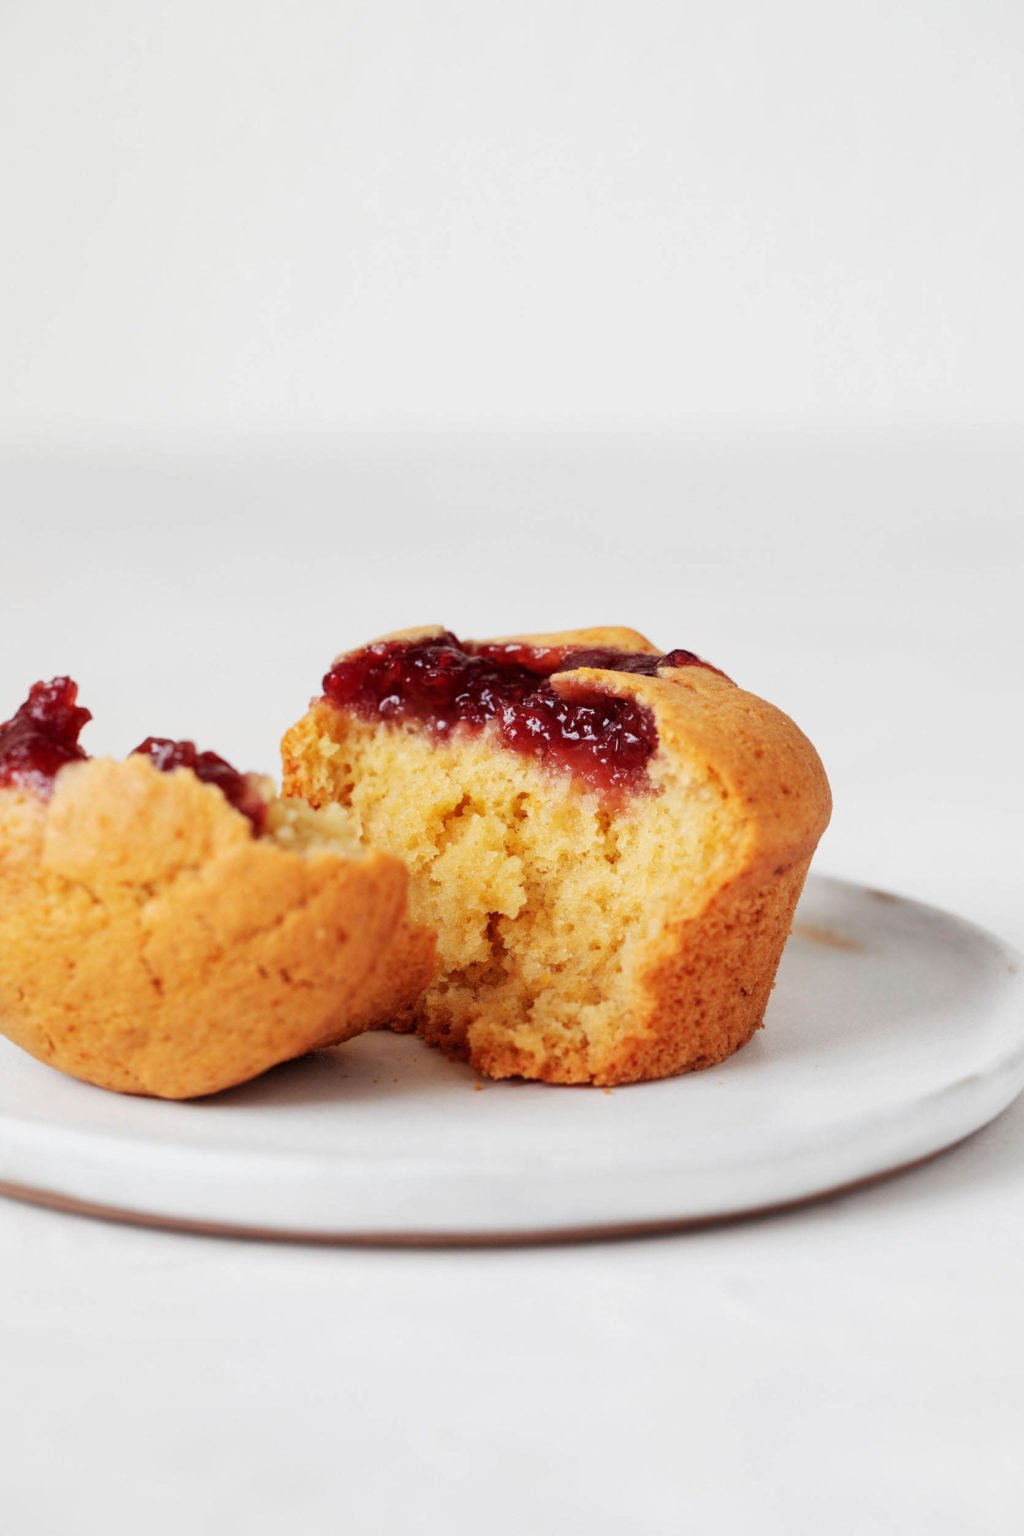 A vegan corn and jam muffin is resting on a small, white plate.